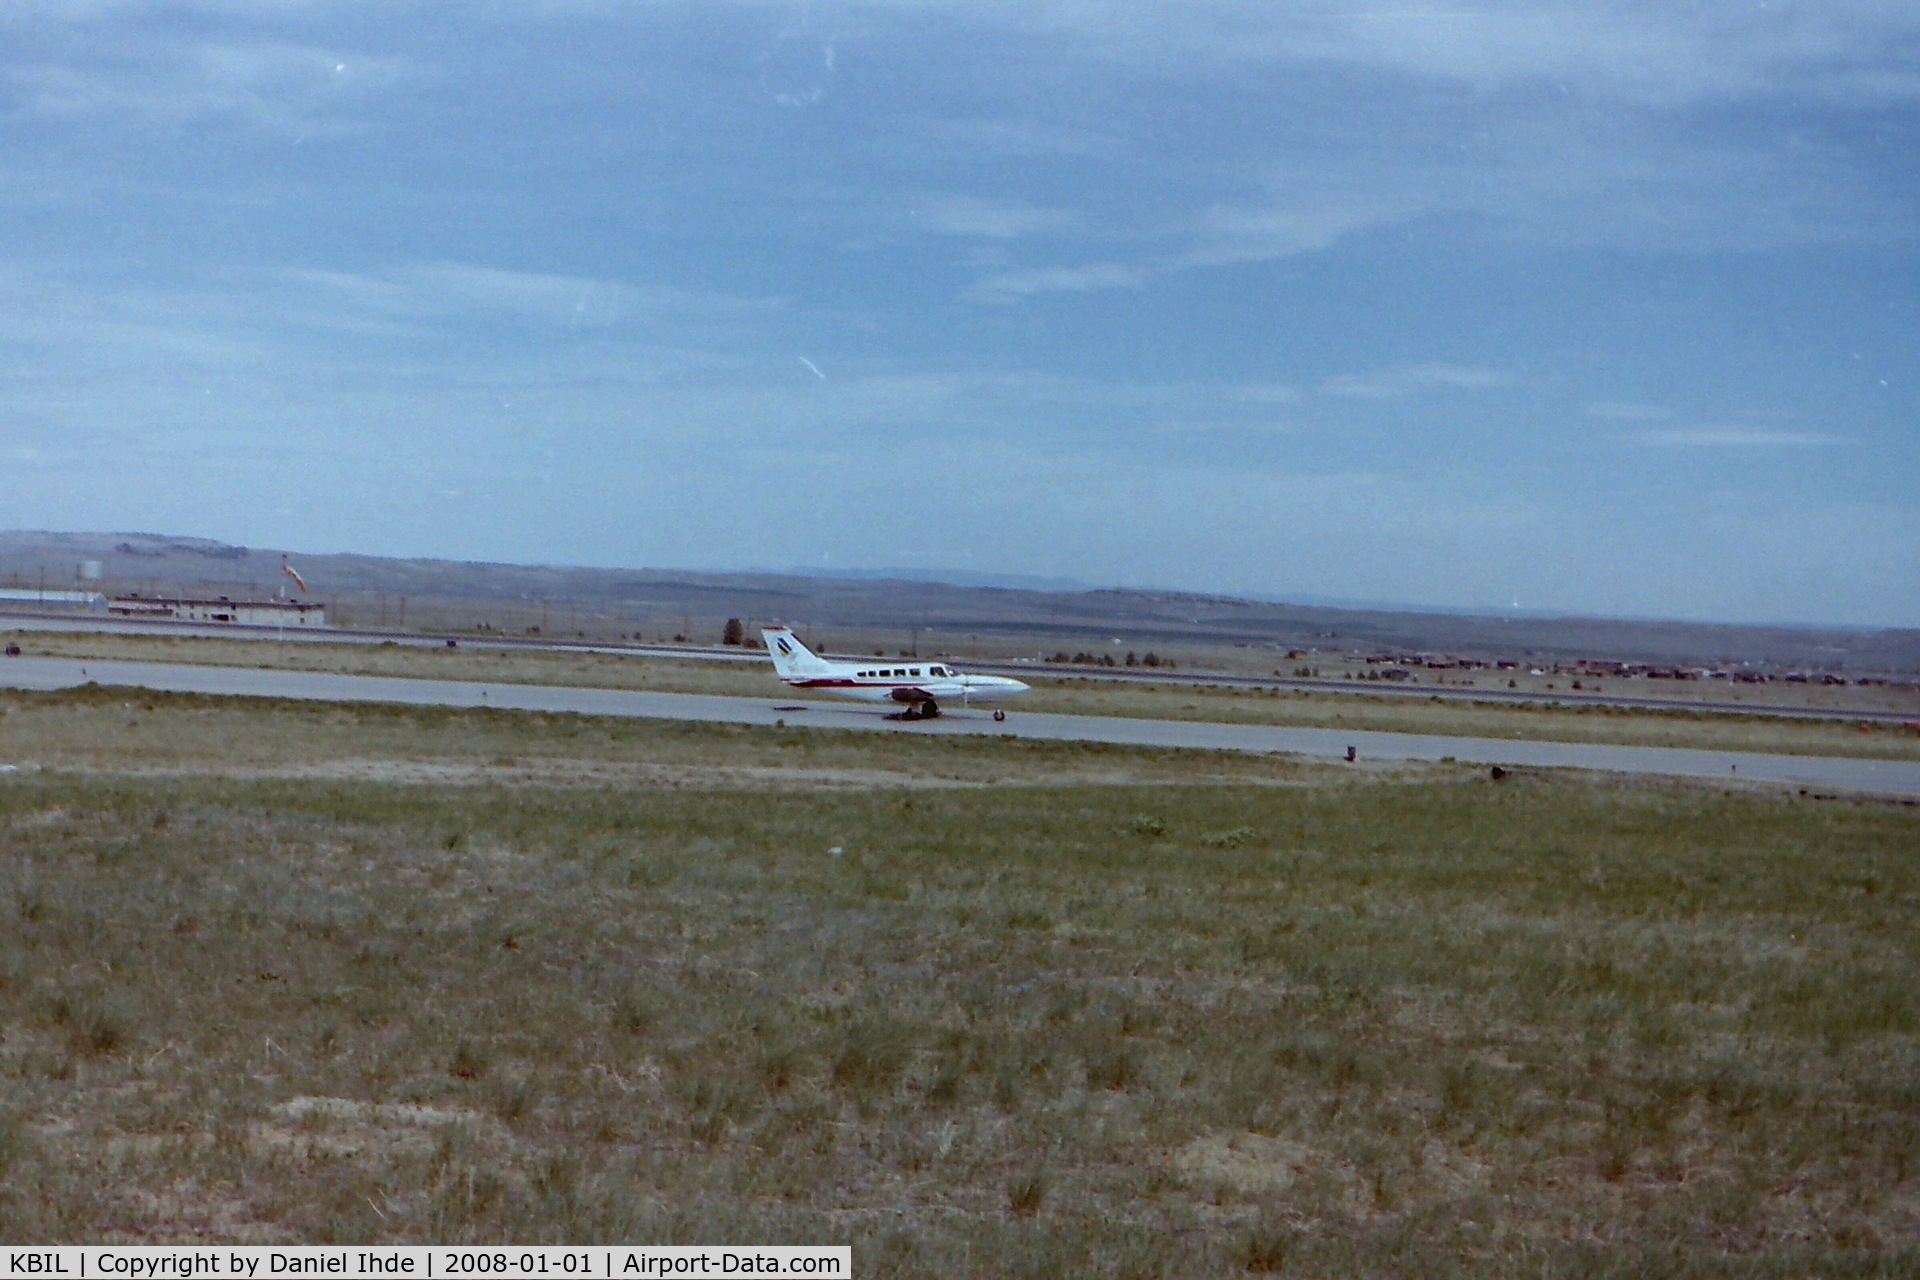 Billings Logan International Airport (BIL) - This is an early early photo of a Big Sky Airlines aircraft departing KBIL in June of 1981.  I believe Big Sky Airlines only began operations a few years prior to this at the most.